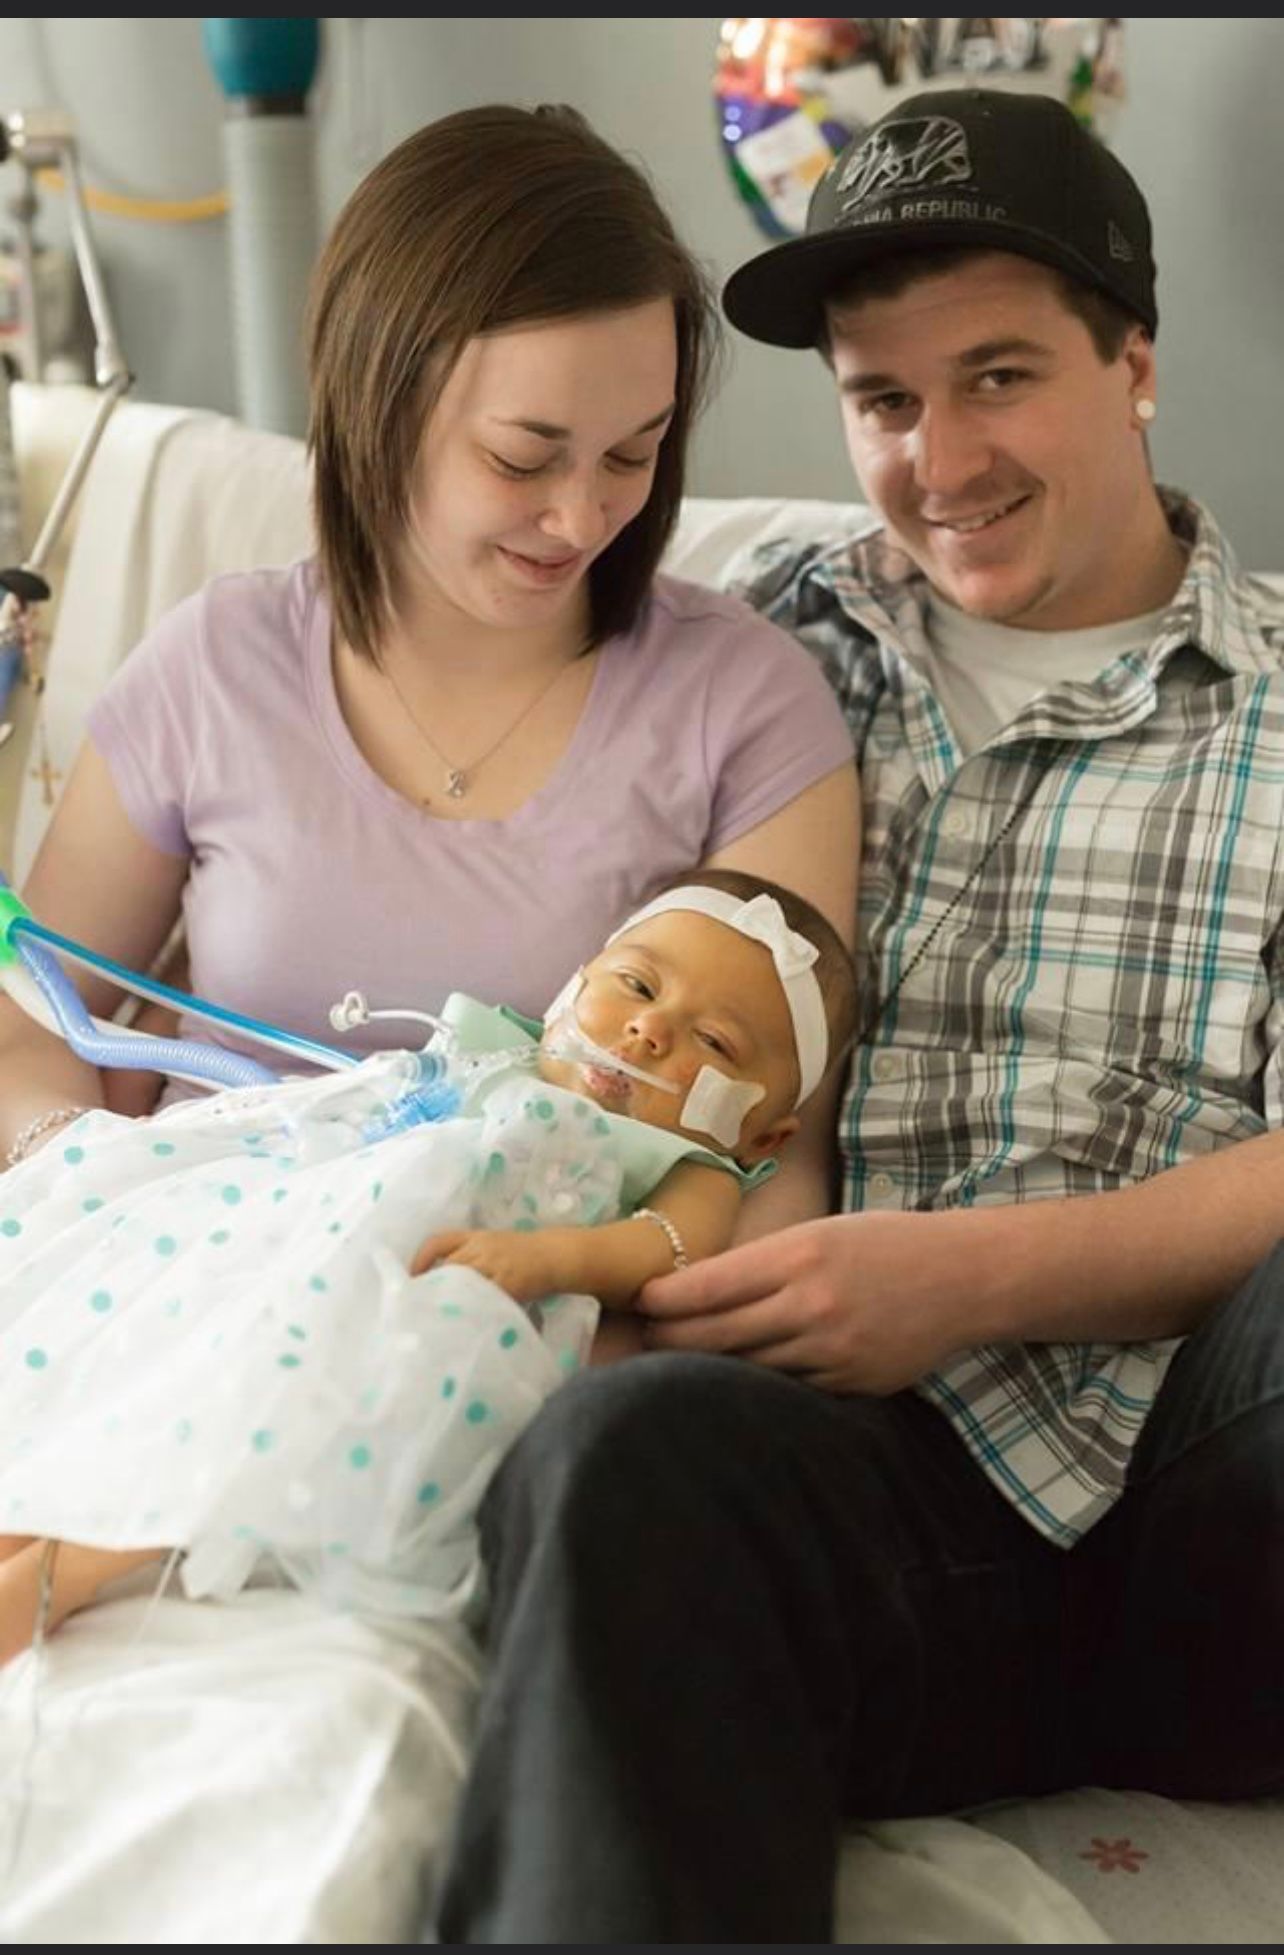 Emily King and her husband holding their newborn baby girl